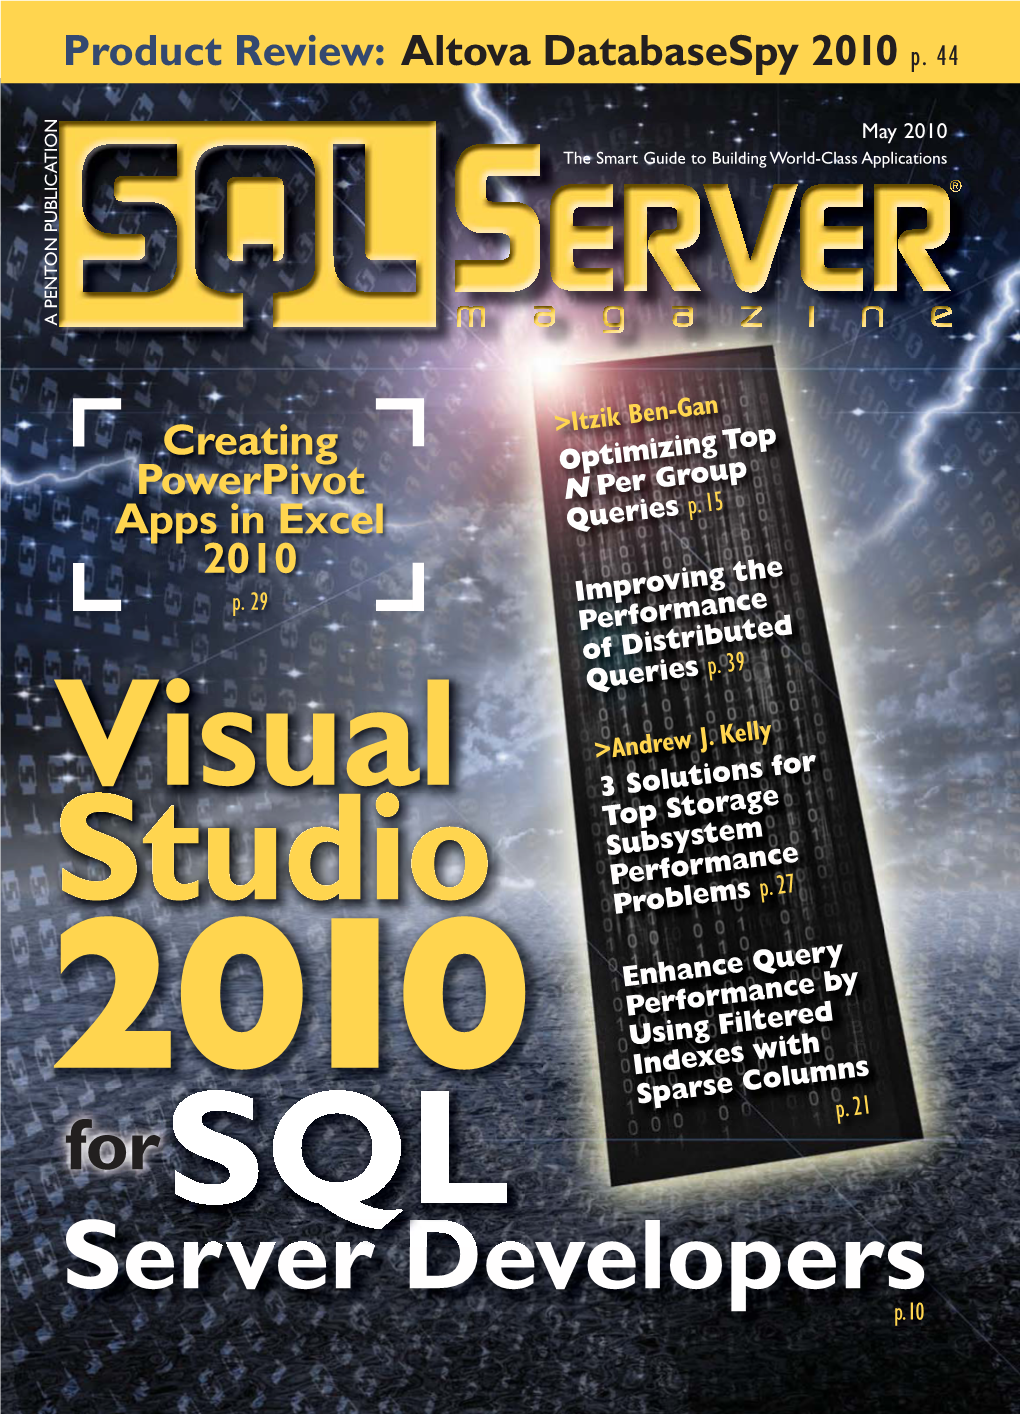 The Essential Guide to SQL Server 2008 R2 for The